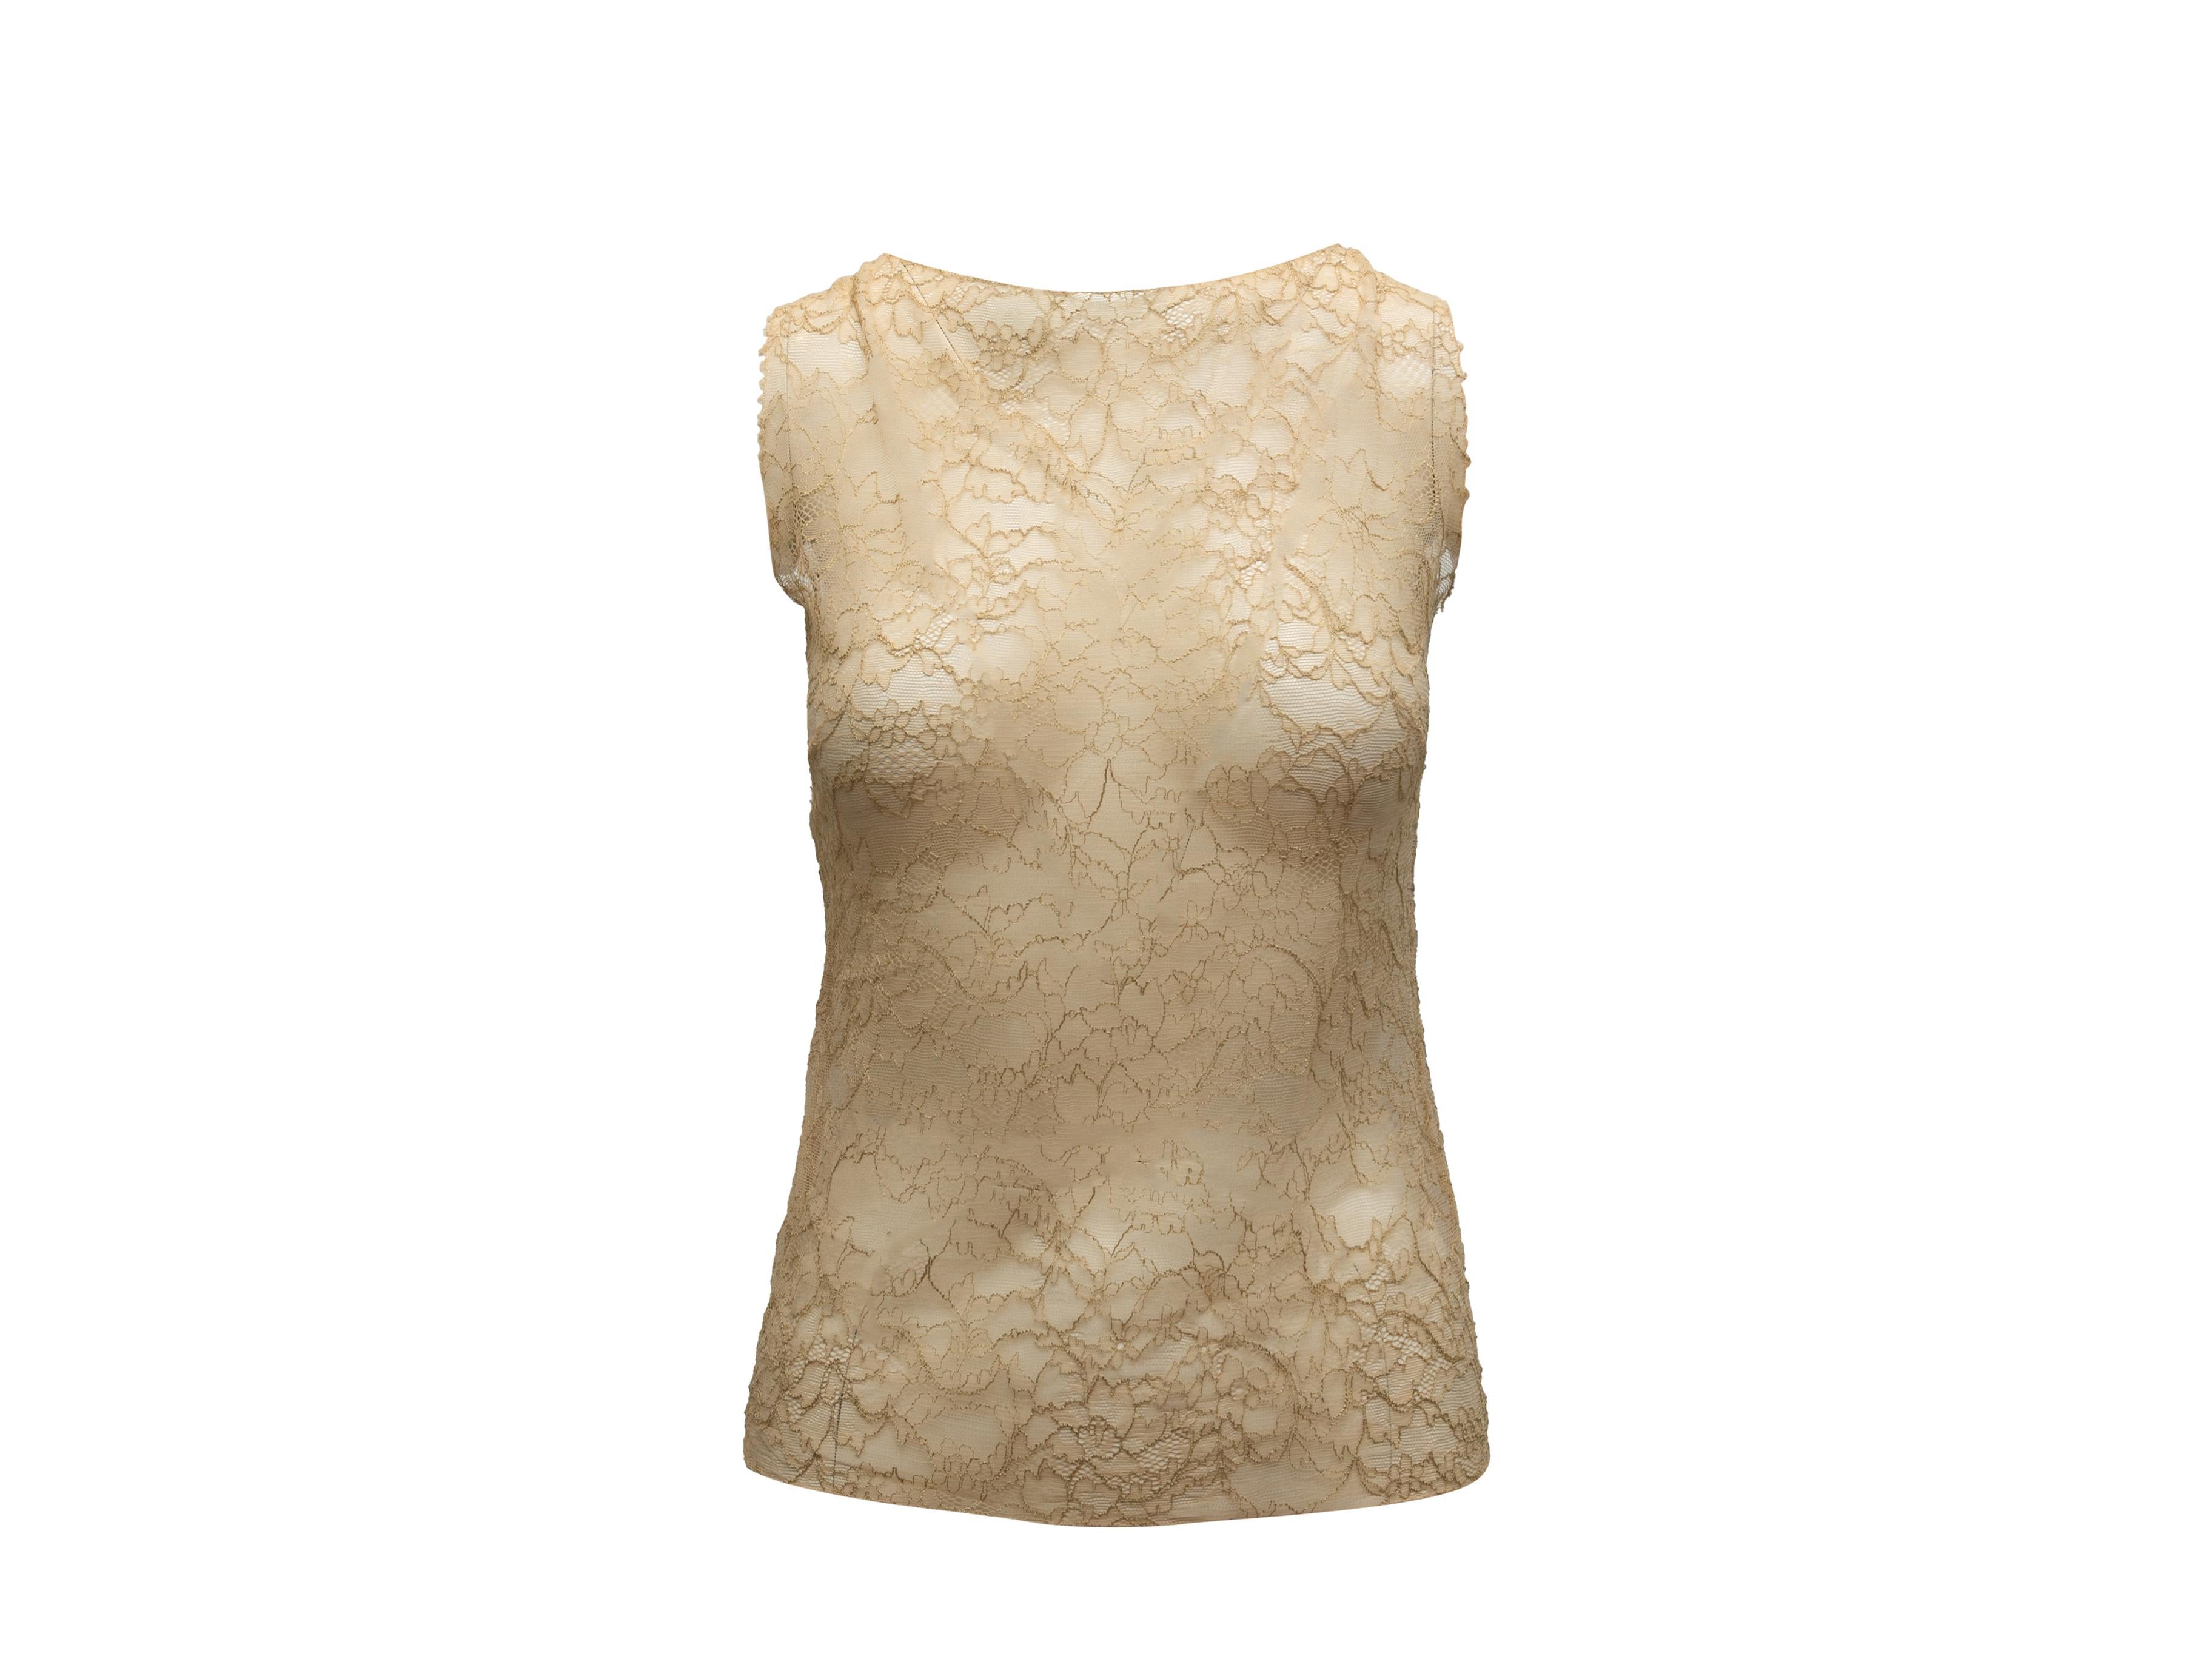 Product details: Tan sheer sleeveless lace top by Chanel. Circa 2005. Crew neck. Keyhold at back featuring button closures. Designer size 38. 30